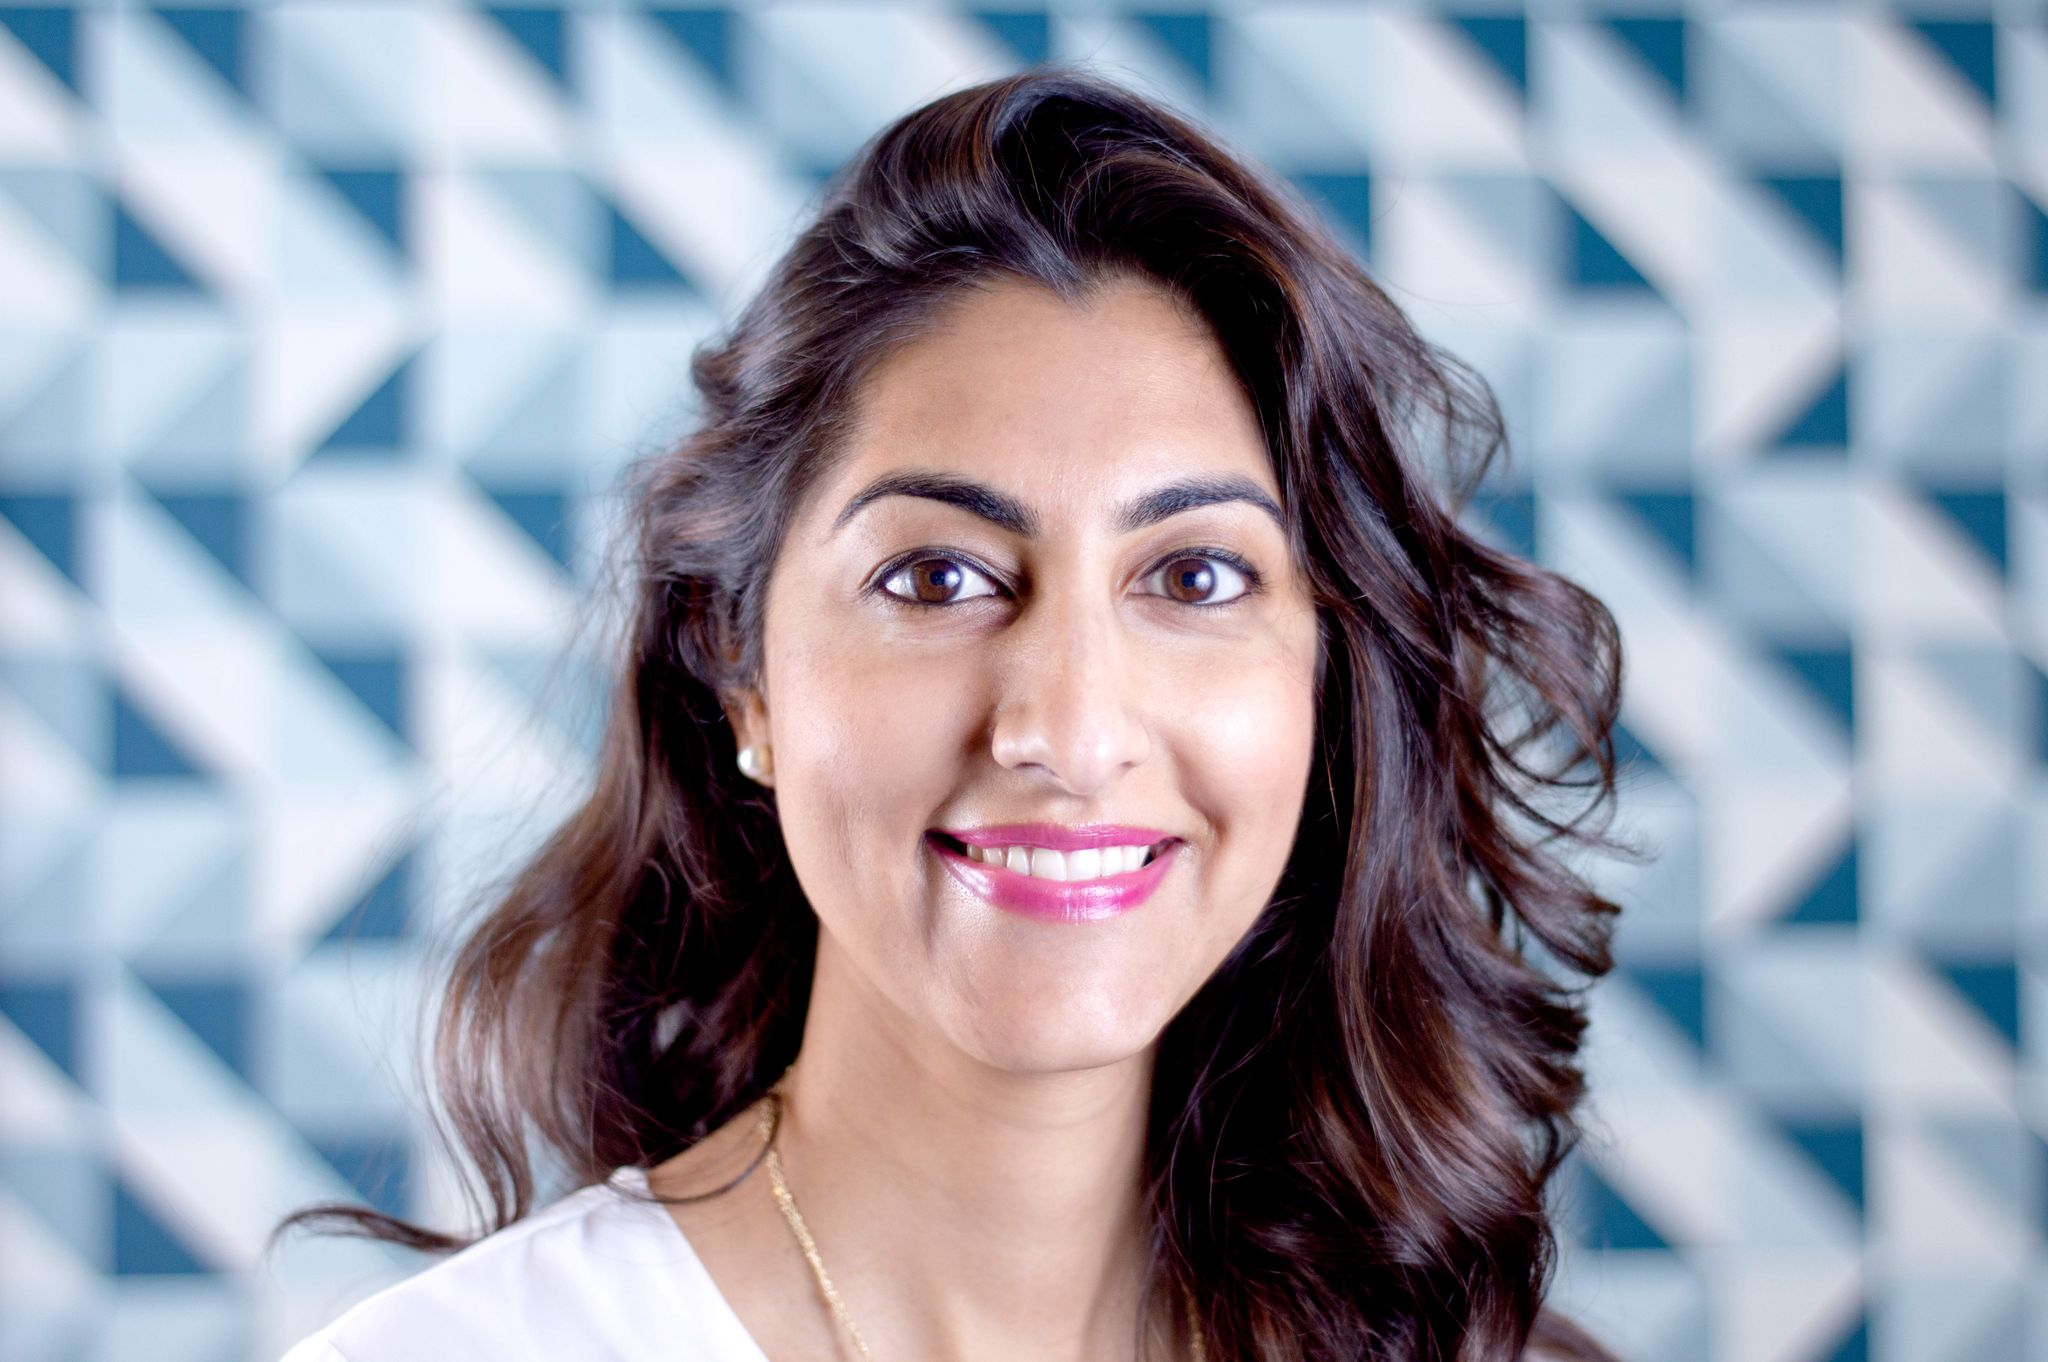 Luvleen Sidhu, Chair, CEO and Founder of BM Technologies, Inc. (BMTX), will be speaking at LendIt Fintech USA 2021.